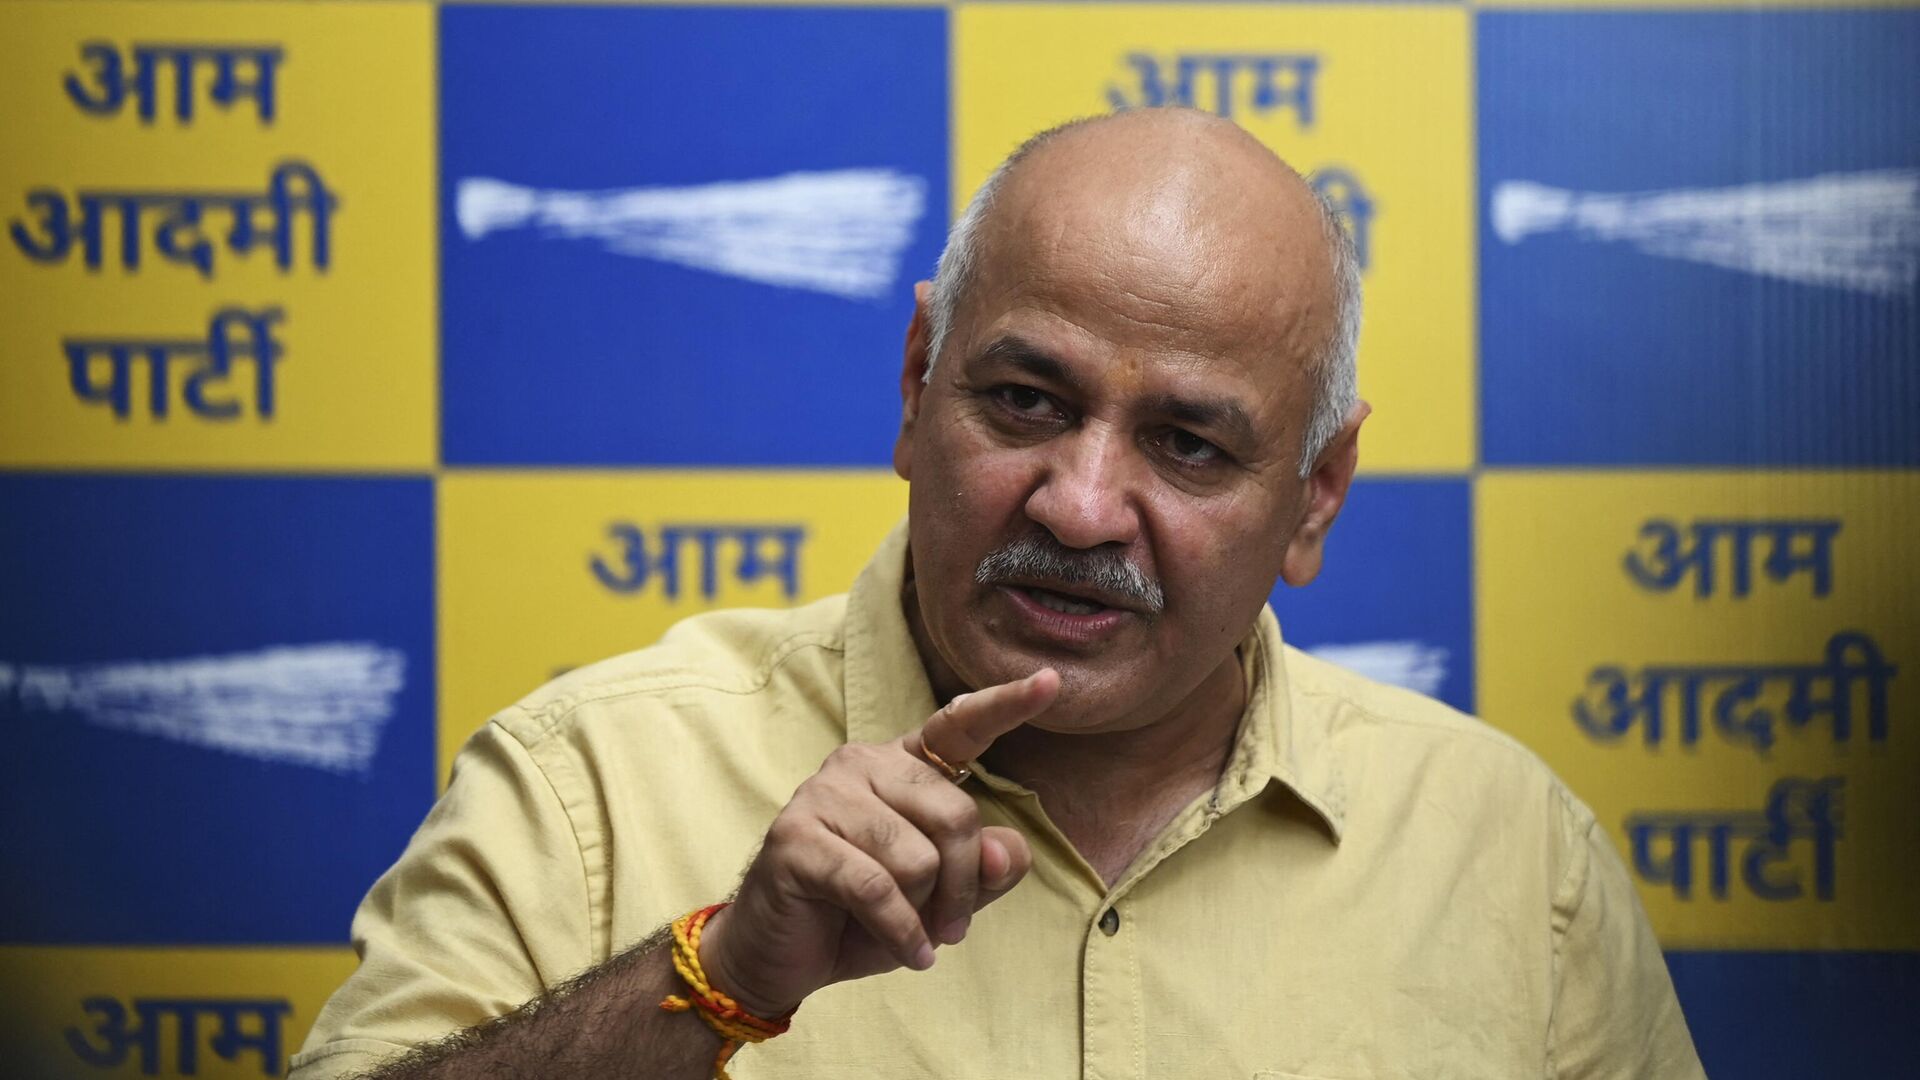 Delhi Deputy Chief Minister Manish Sisodia speaks during a press conference in New Delhi on August 20, 2022, after the Central Bureau of Investigation (CBI) had raided his home in relation to alleged irregularities with the implementation of the Excise Policy 2021-22.  - Sputnik India, 1920, 05.03.2023